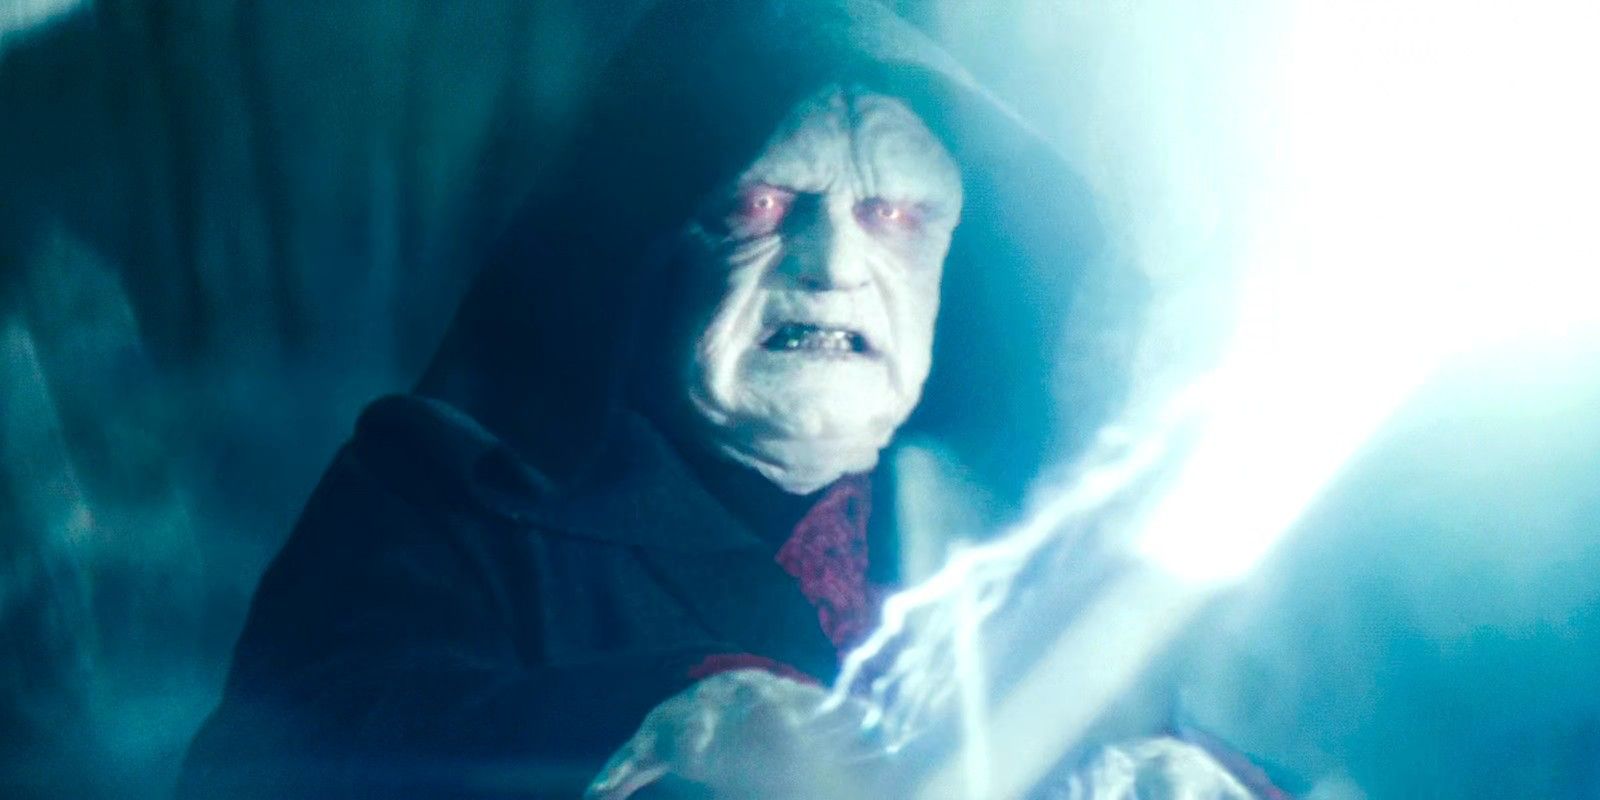 Palpatine using his powers in The Rise of Skywalker